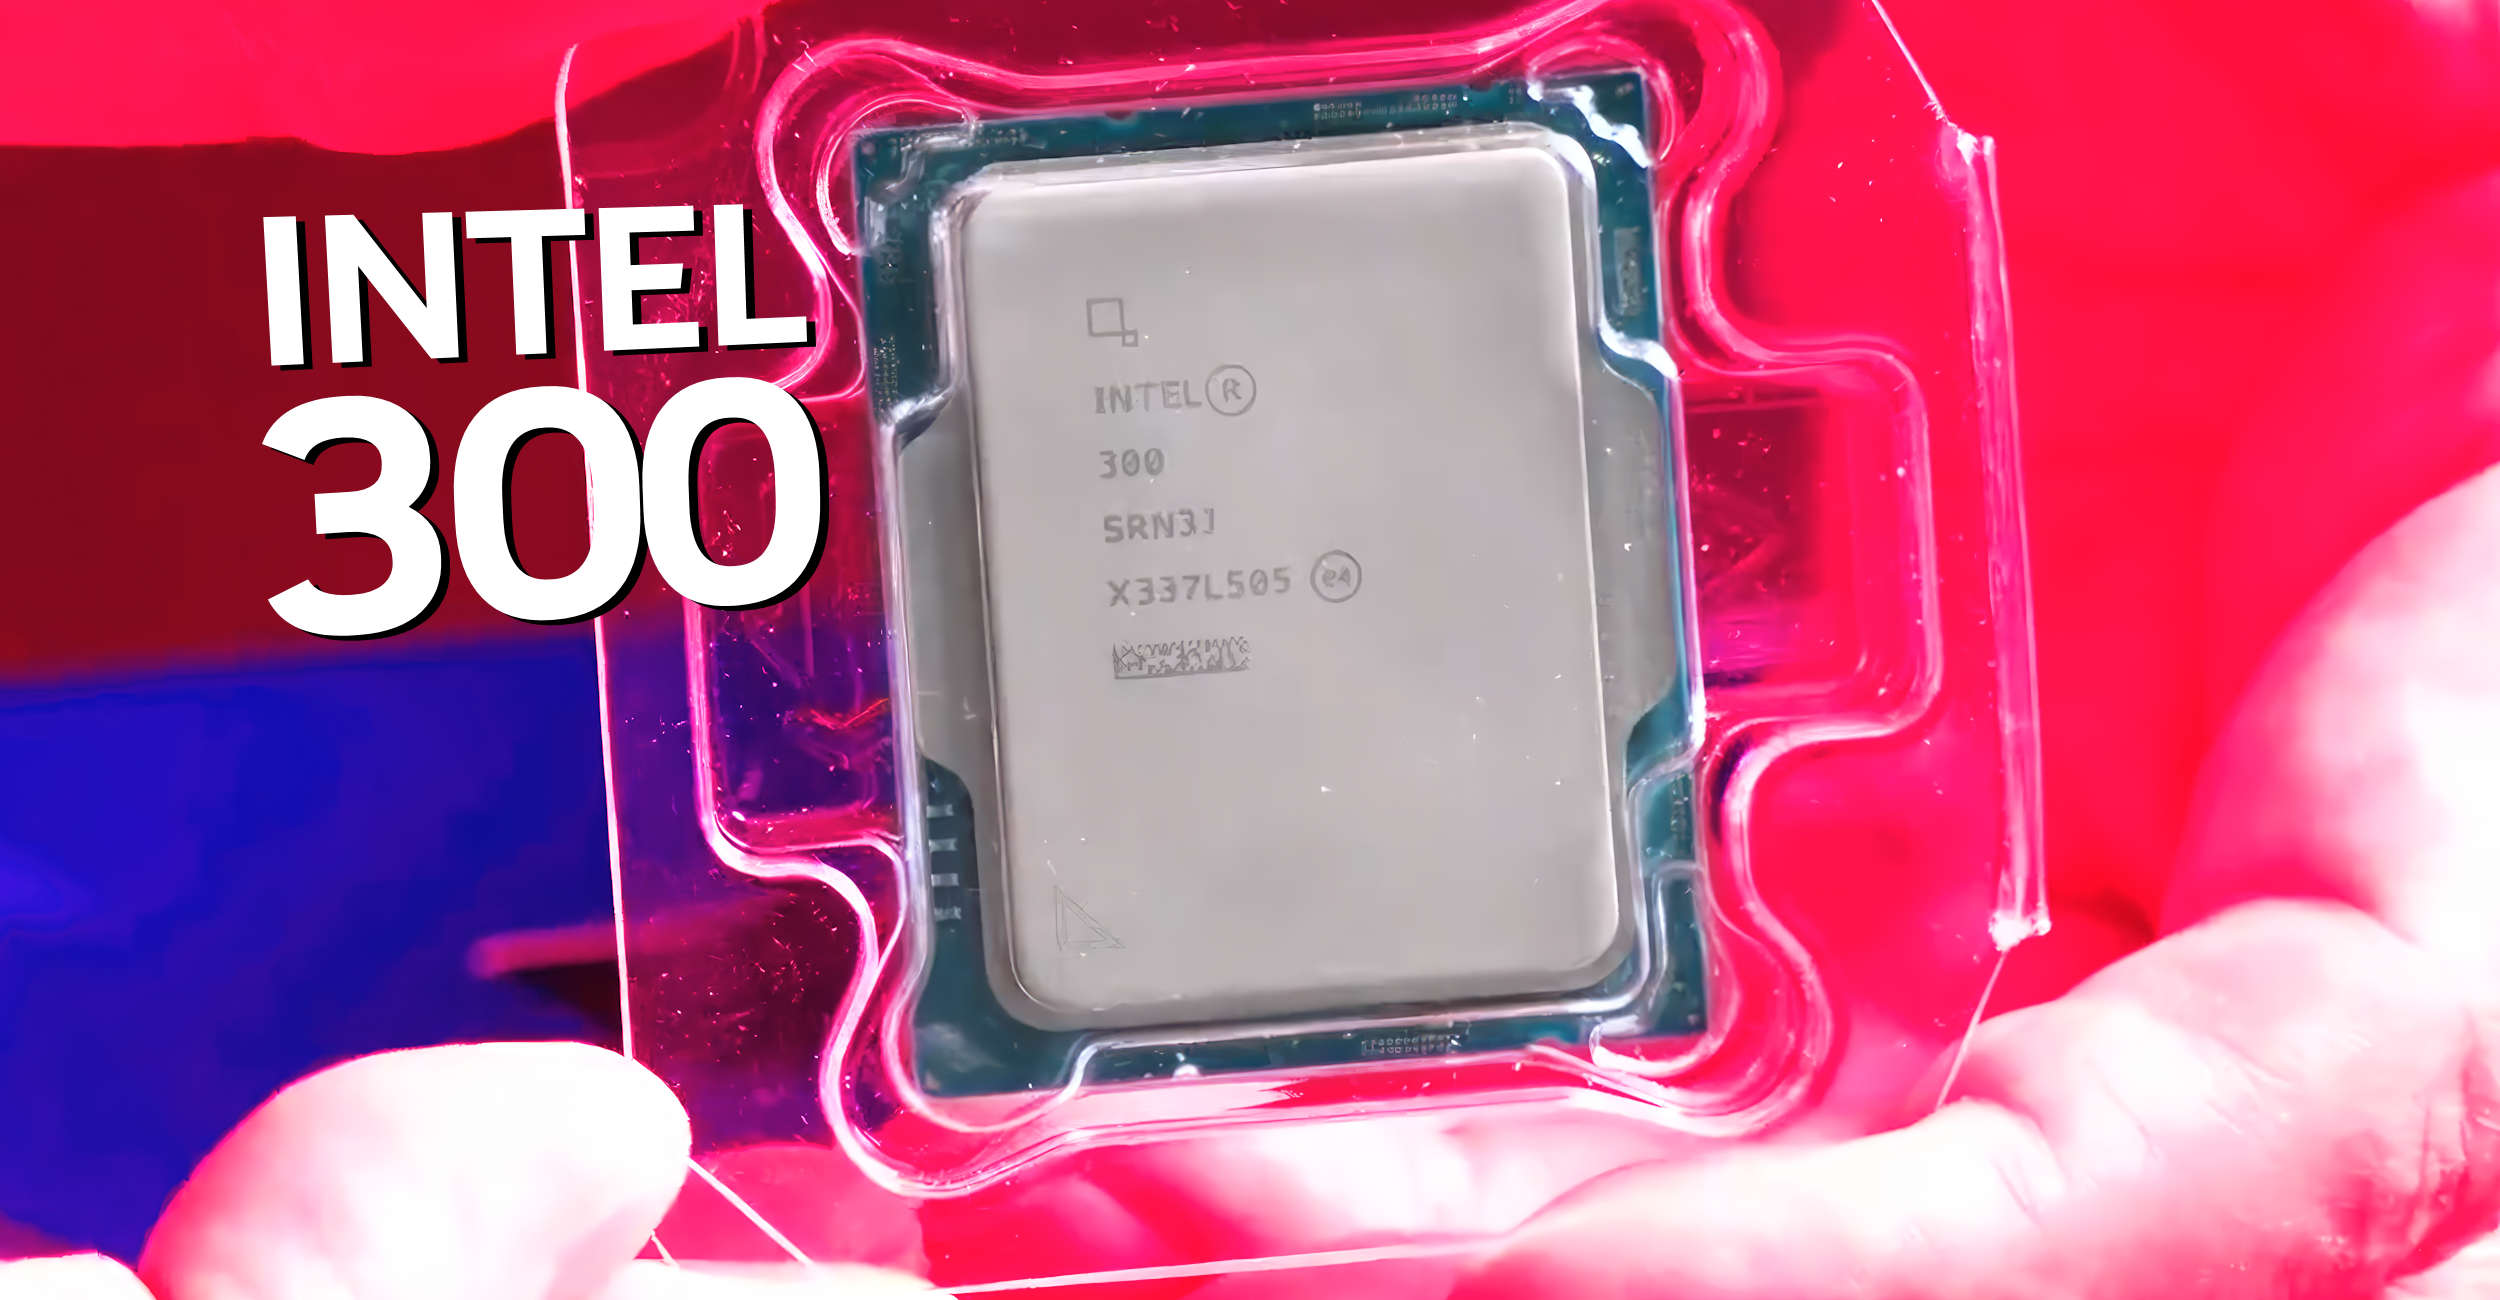 Intel Processor 300 dual-core CPU has been tested - the slowest